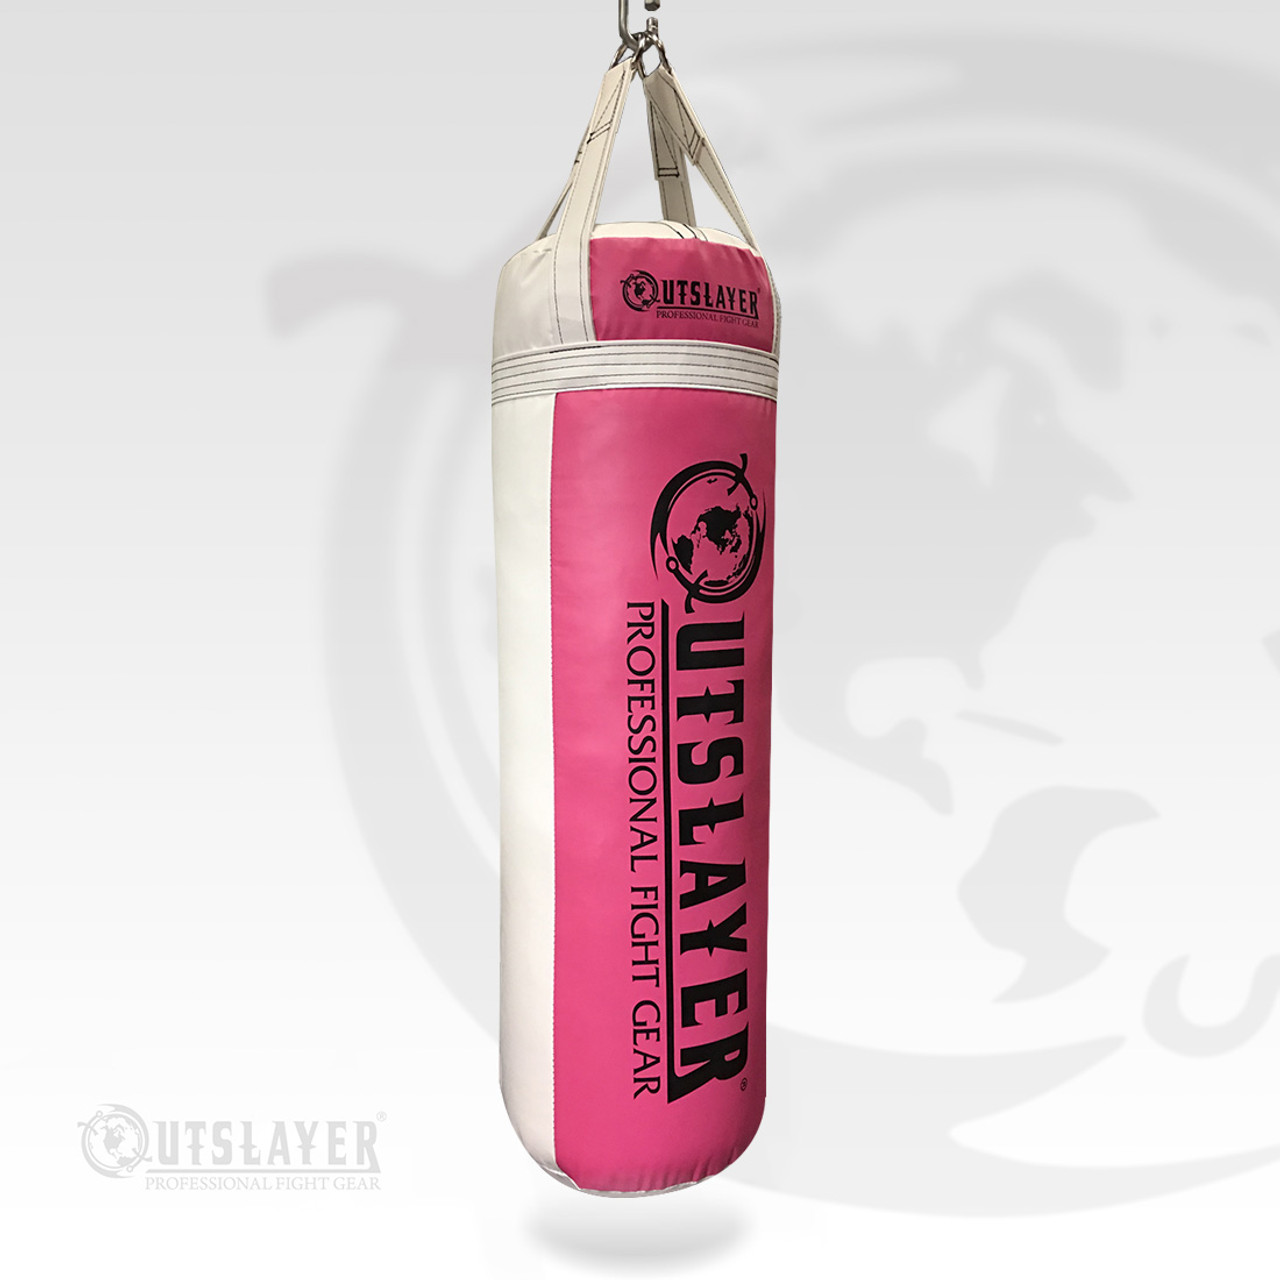 Outslayer #03 80lb Punching Bag for Boxing and MMA. Made in USA